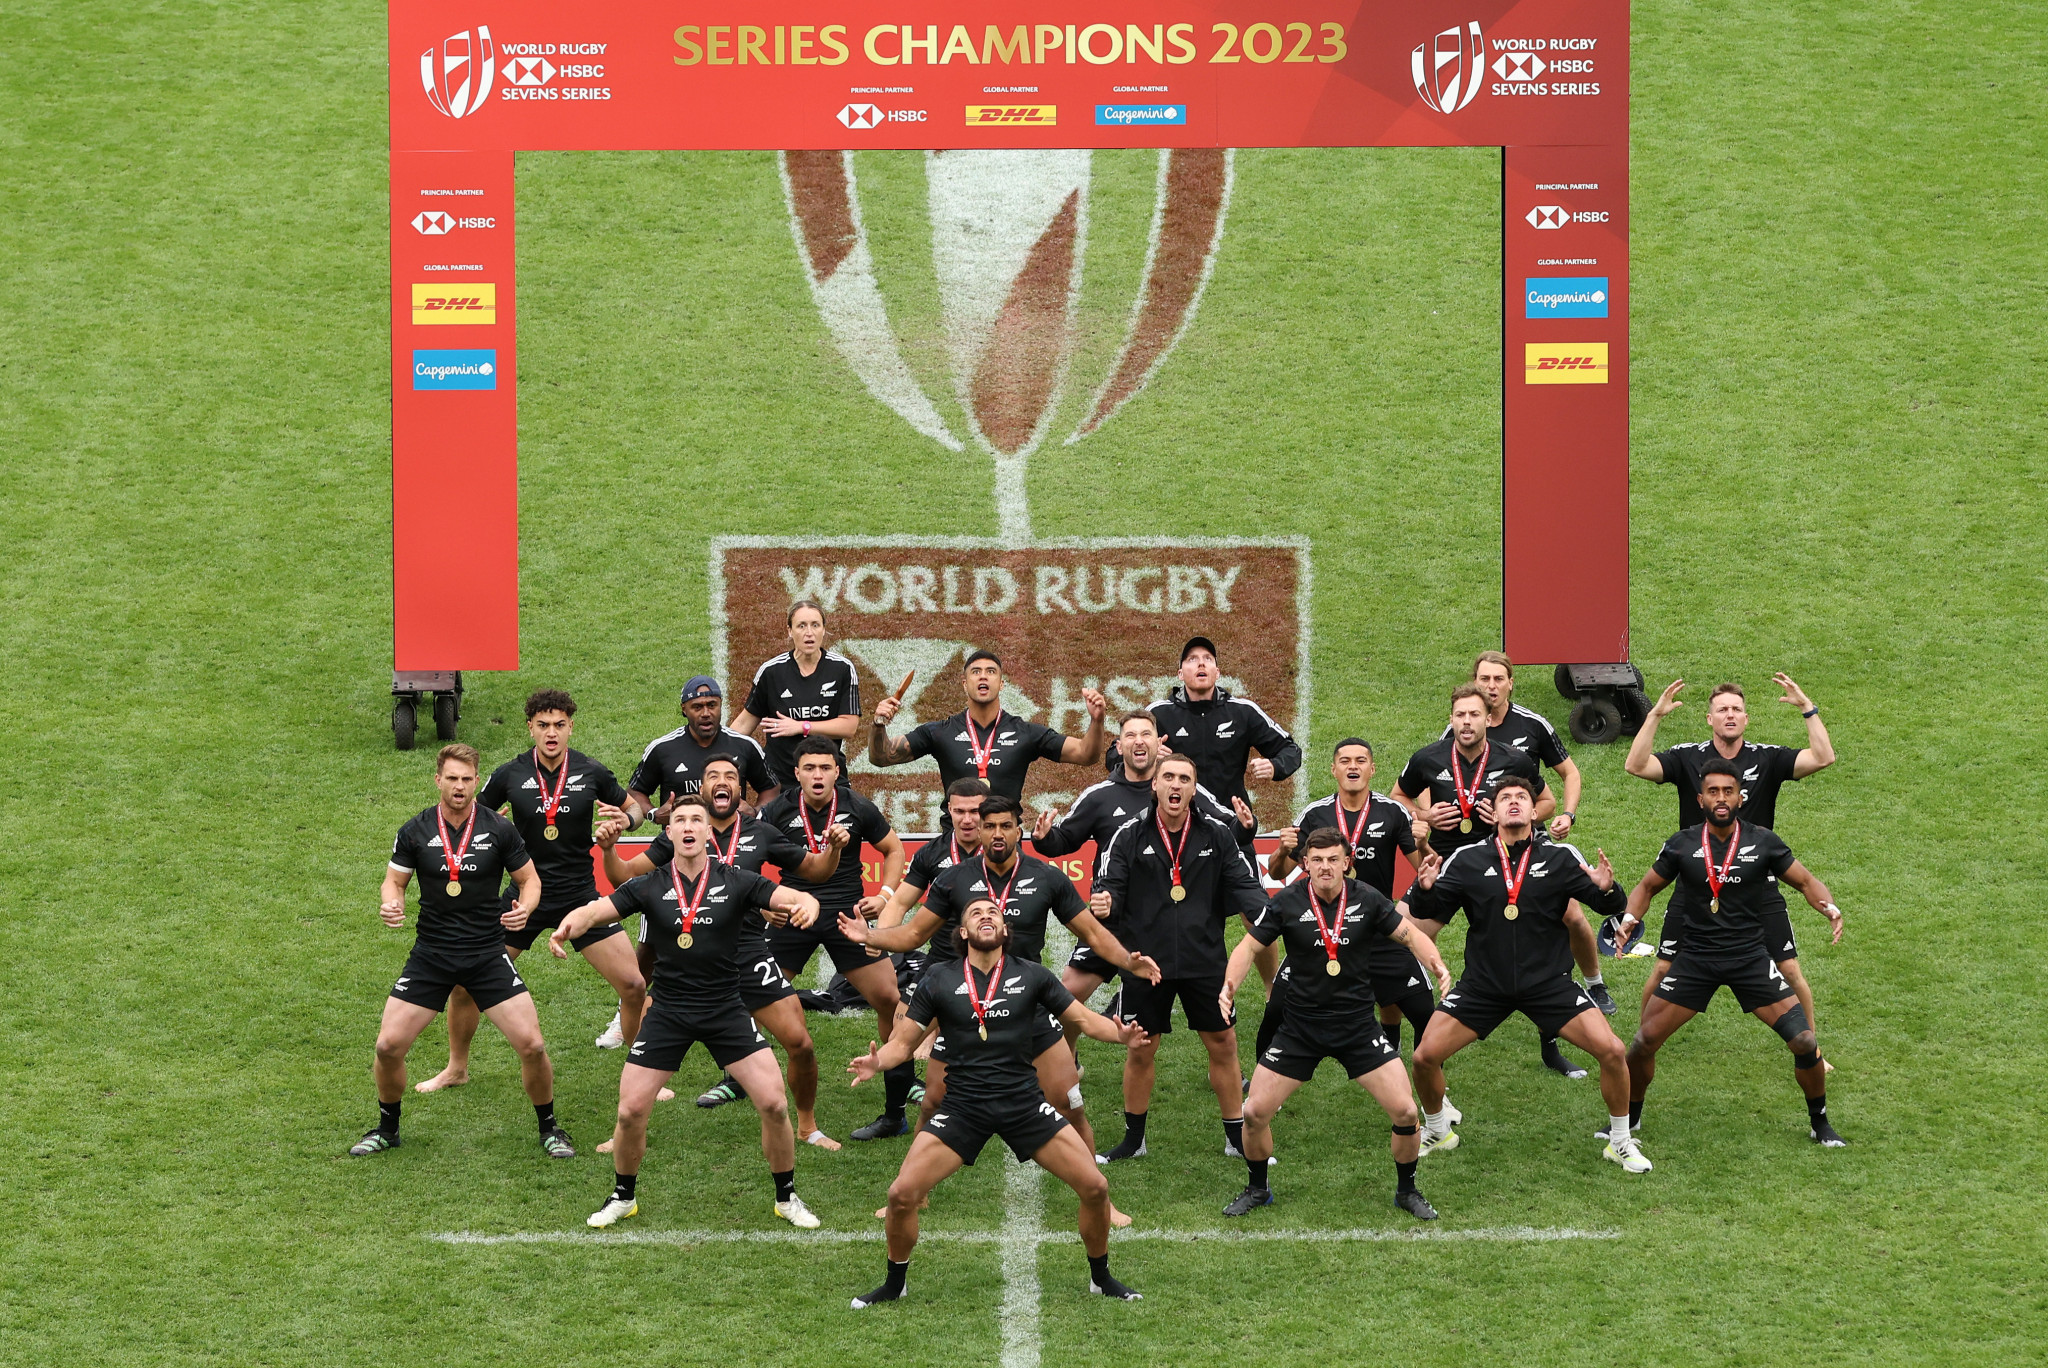 New Zealand finished fourth in London, but were presented with the overall World Rugby Sevens Series title ©Getty Images